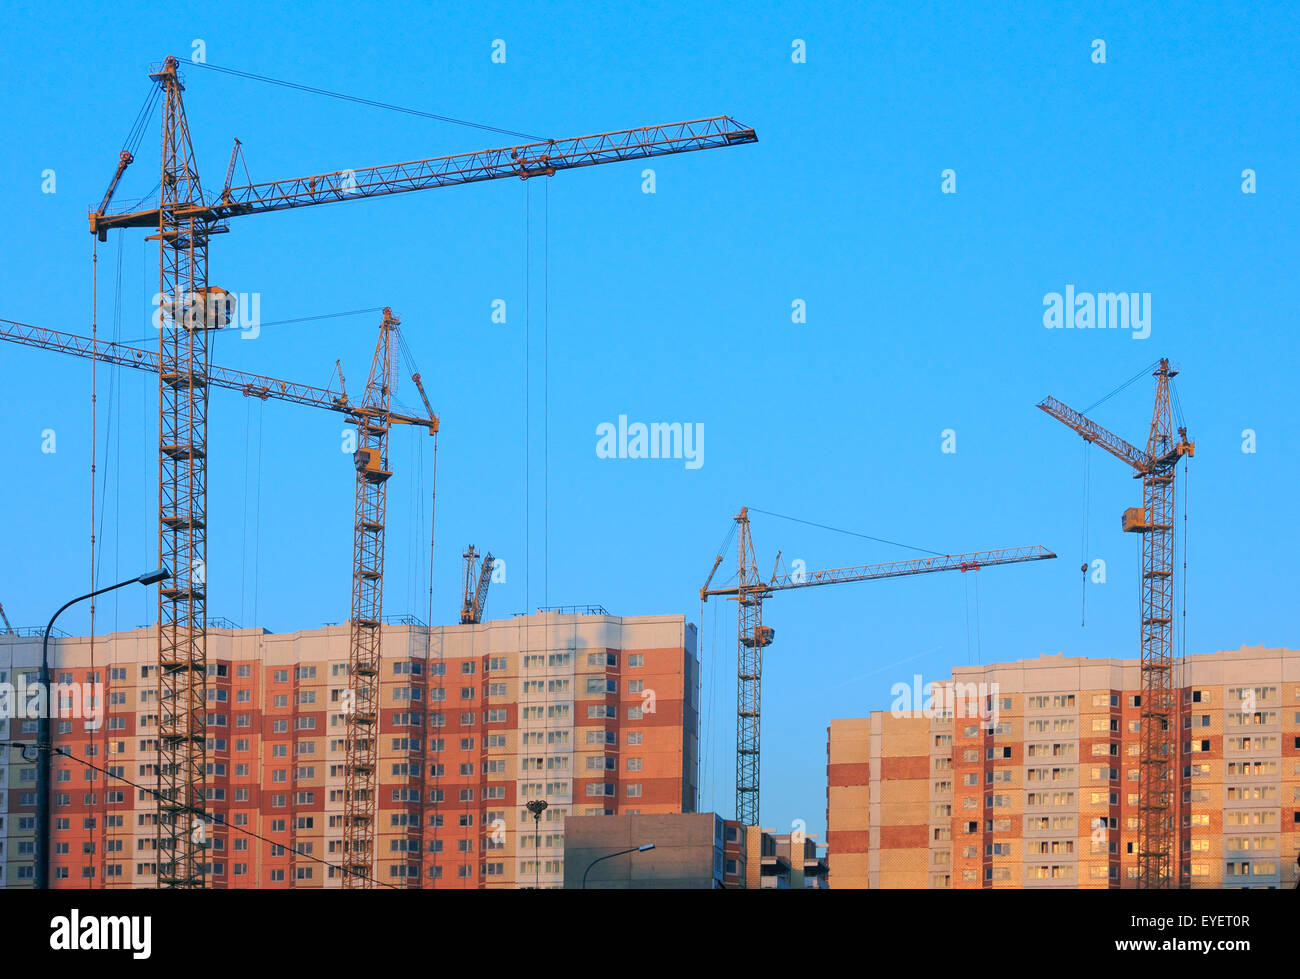 Cranes on construction site of new apartment buildings at sunset. Stock Photo